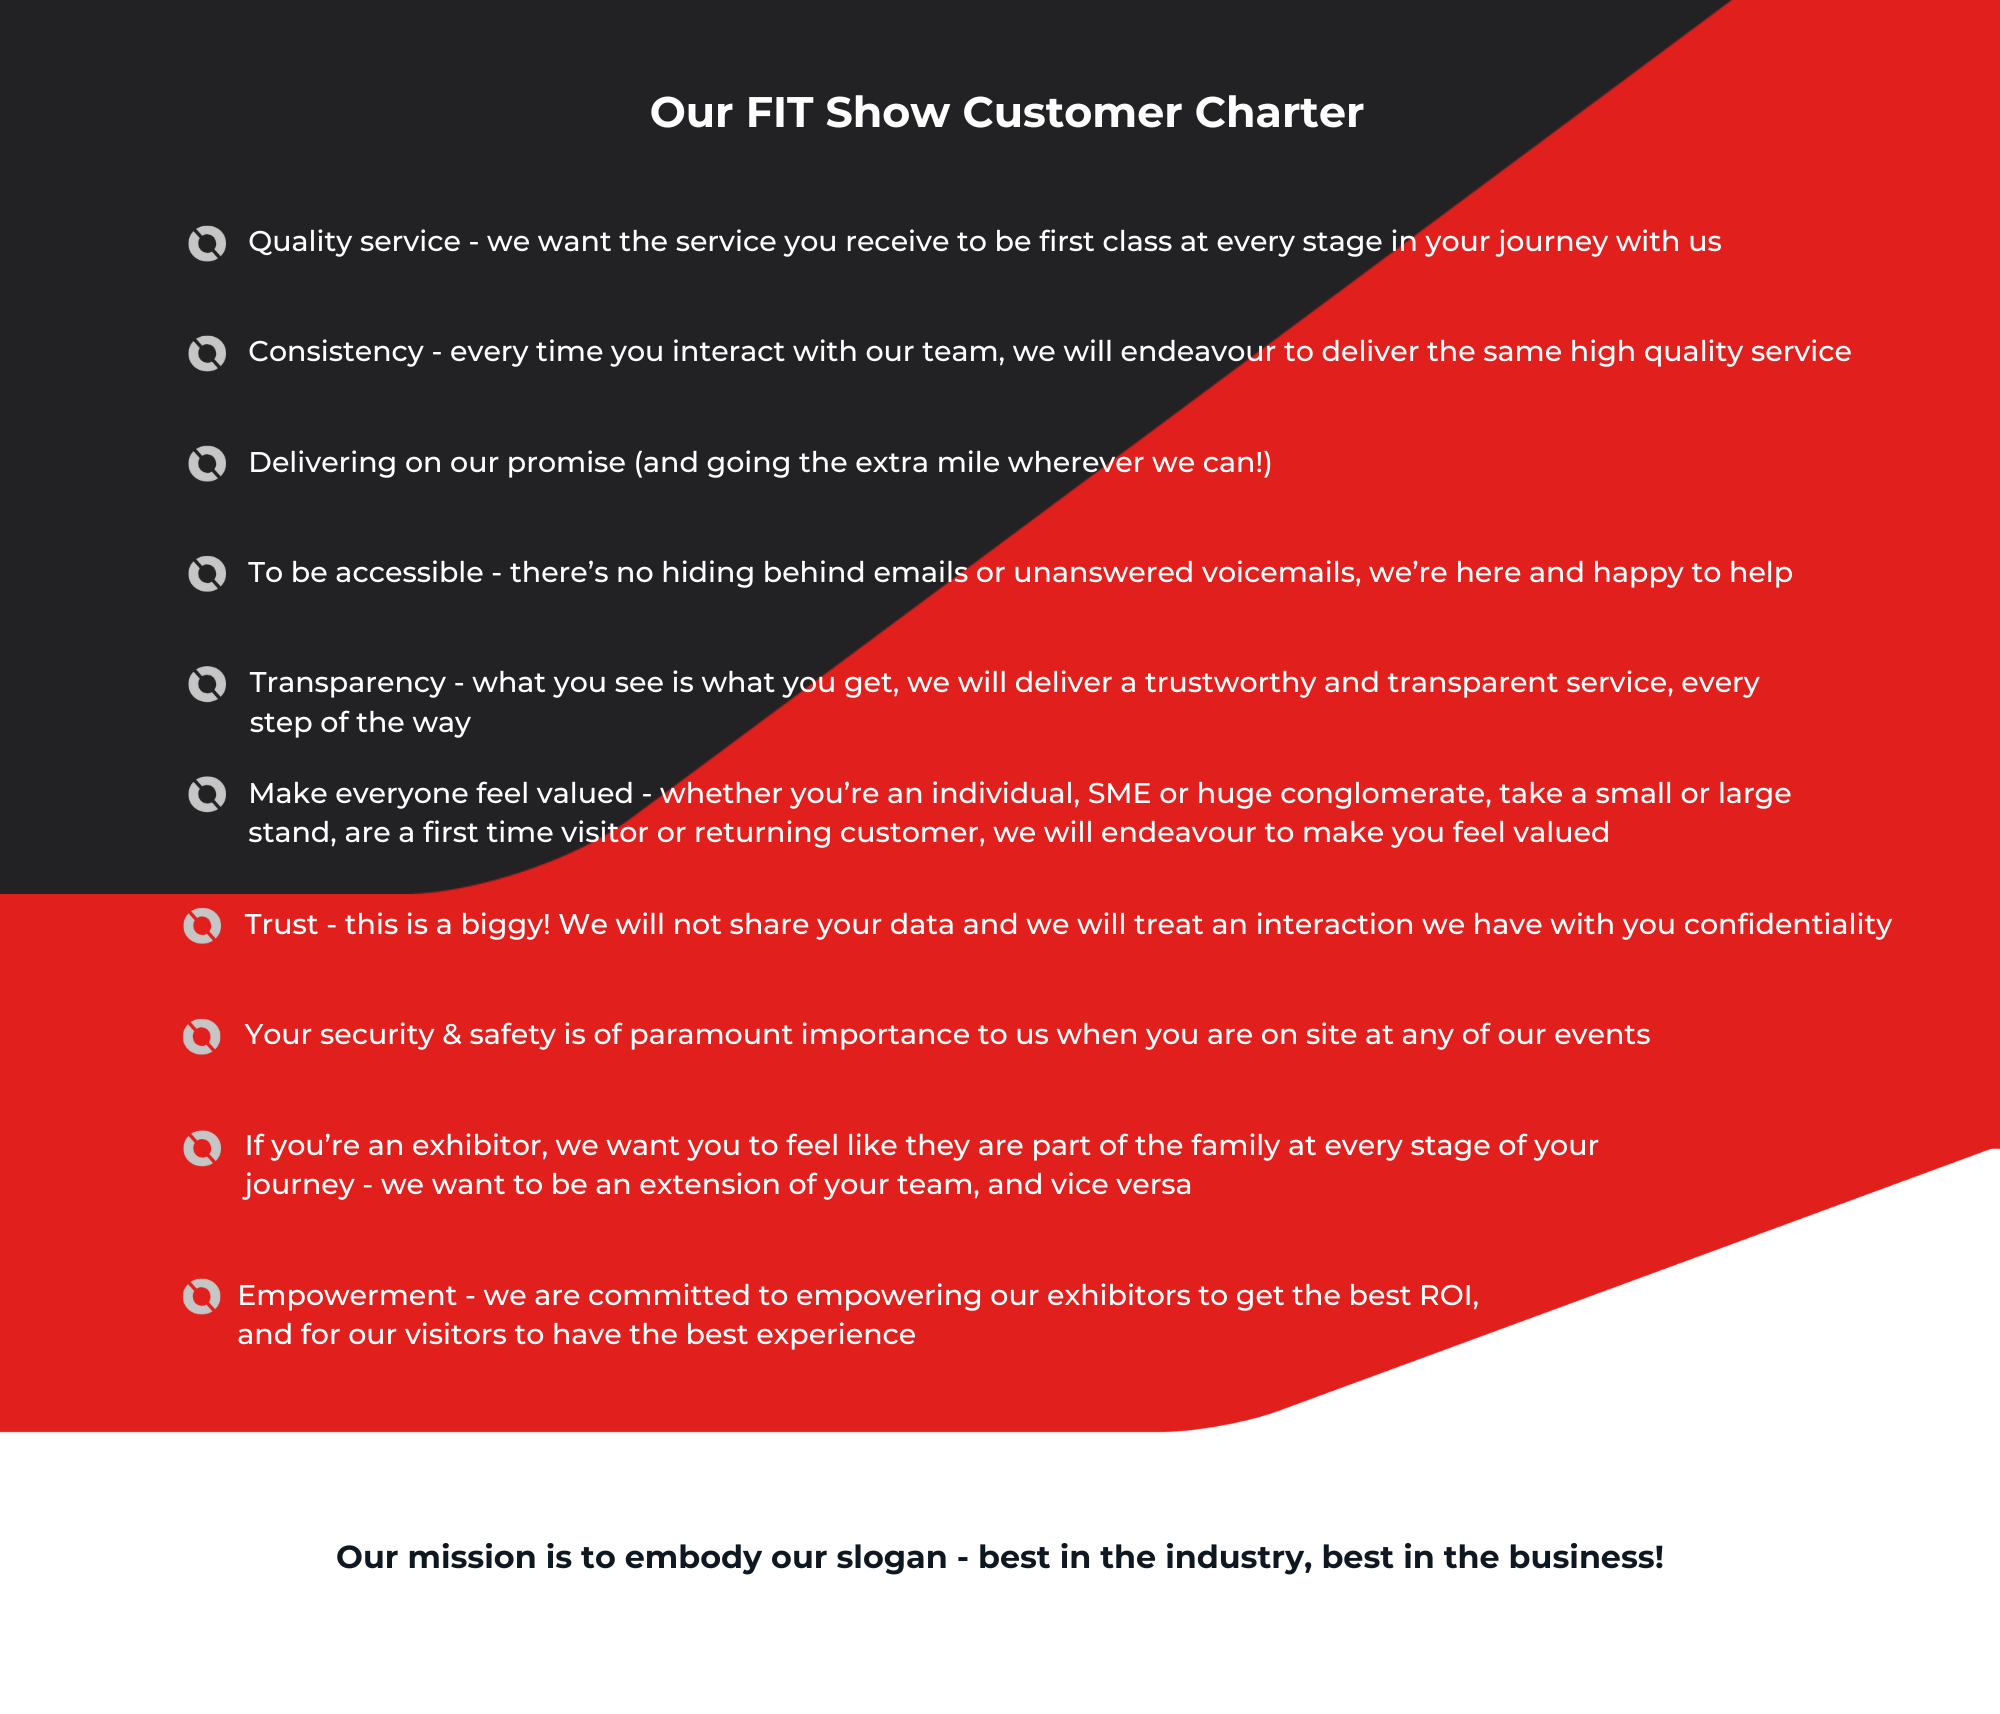 FIT Show customer charter